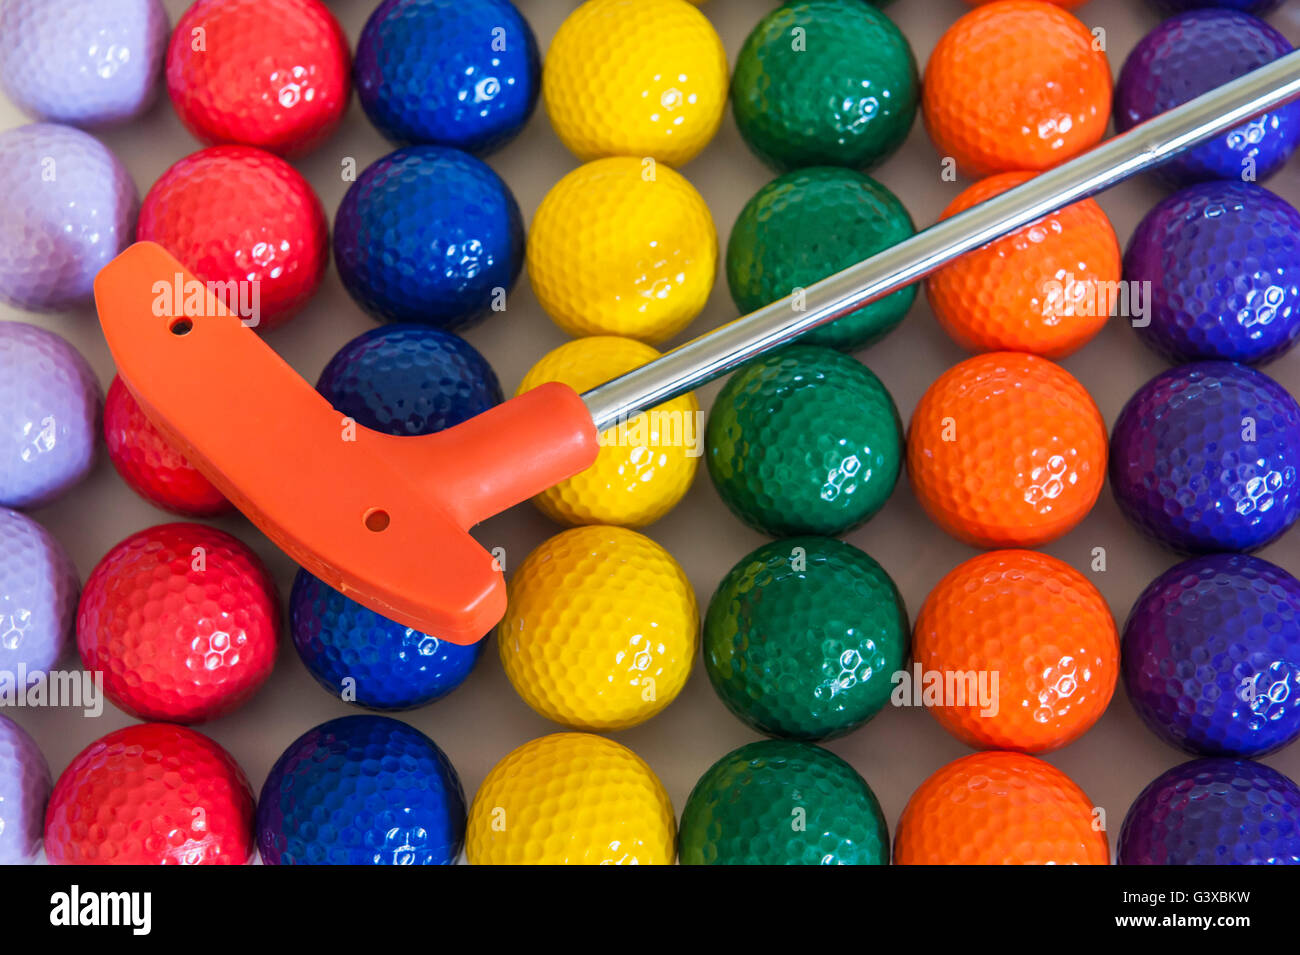 Orange mini golf club with a variety of colorful golf balls Stock Photo